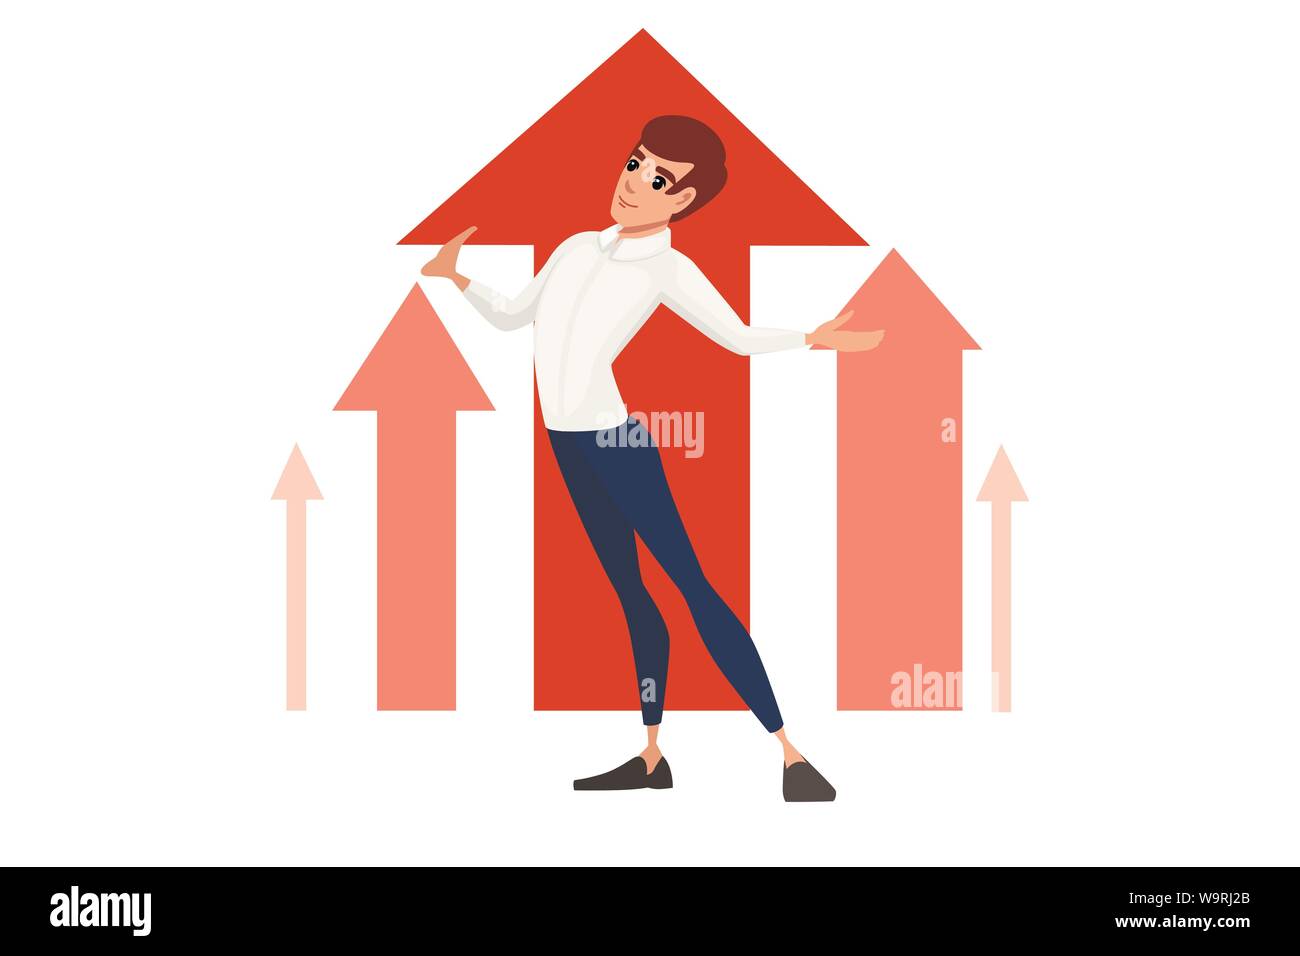 Man wearing suit with upraised hand cartoon character design flat vector illustration on white background Stock Vector